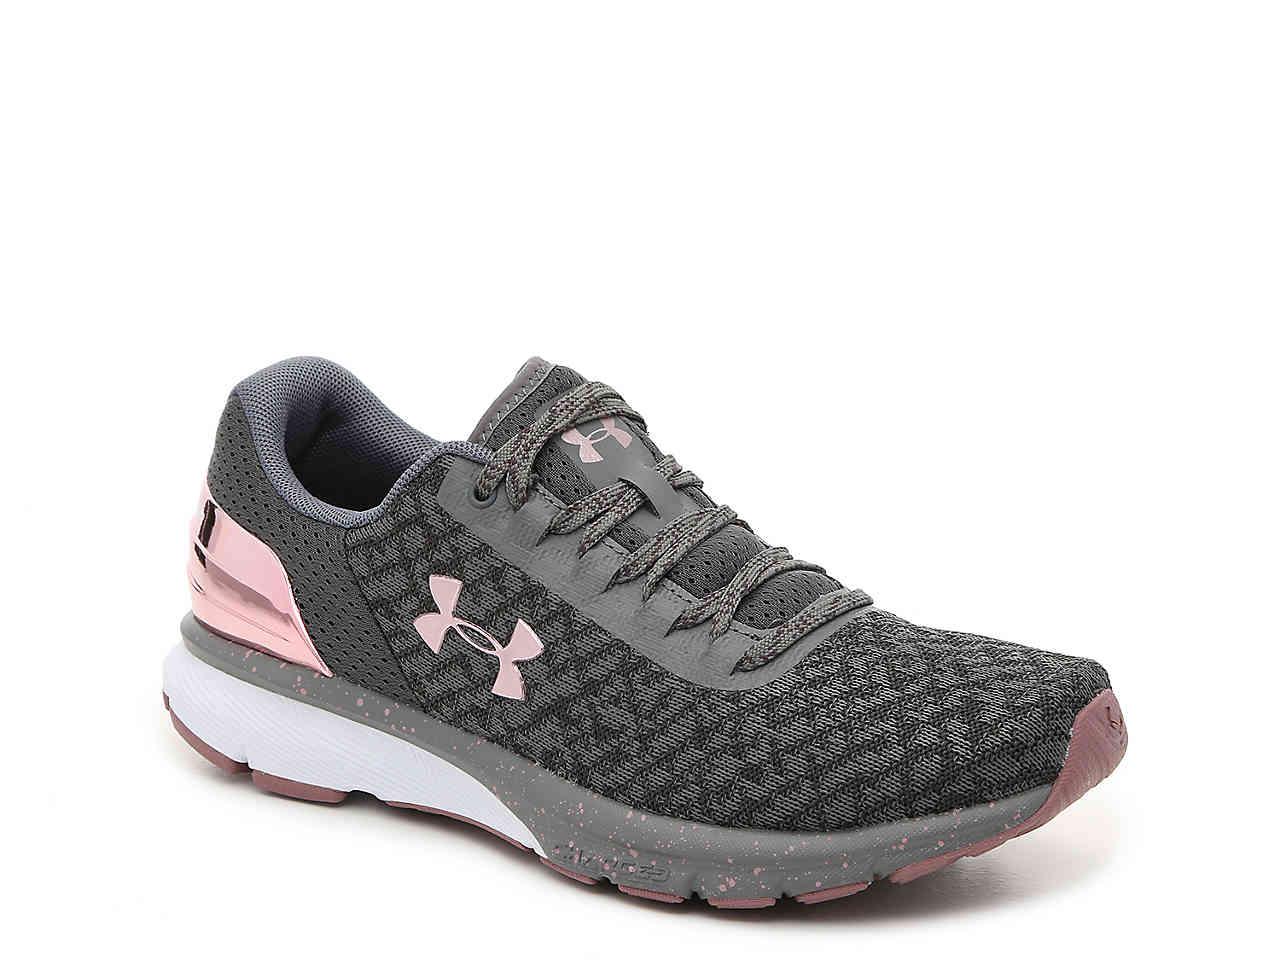 Under Armour Charged Escape 2 Running Shoe in Gray | Lyst